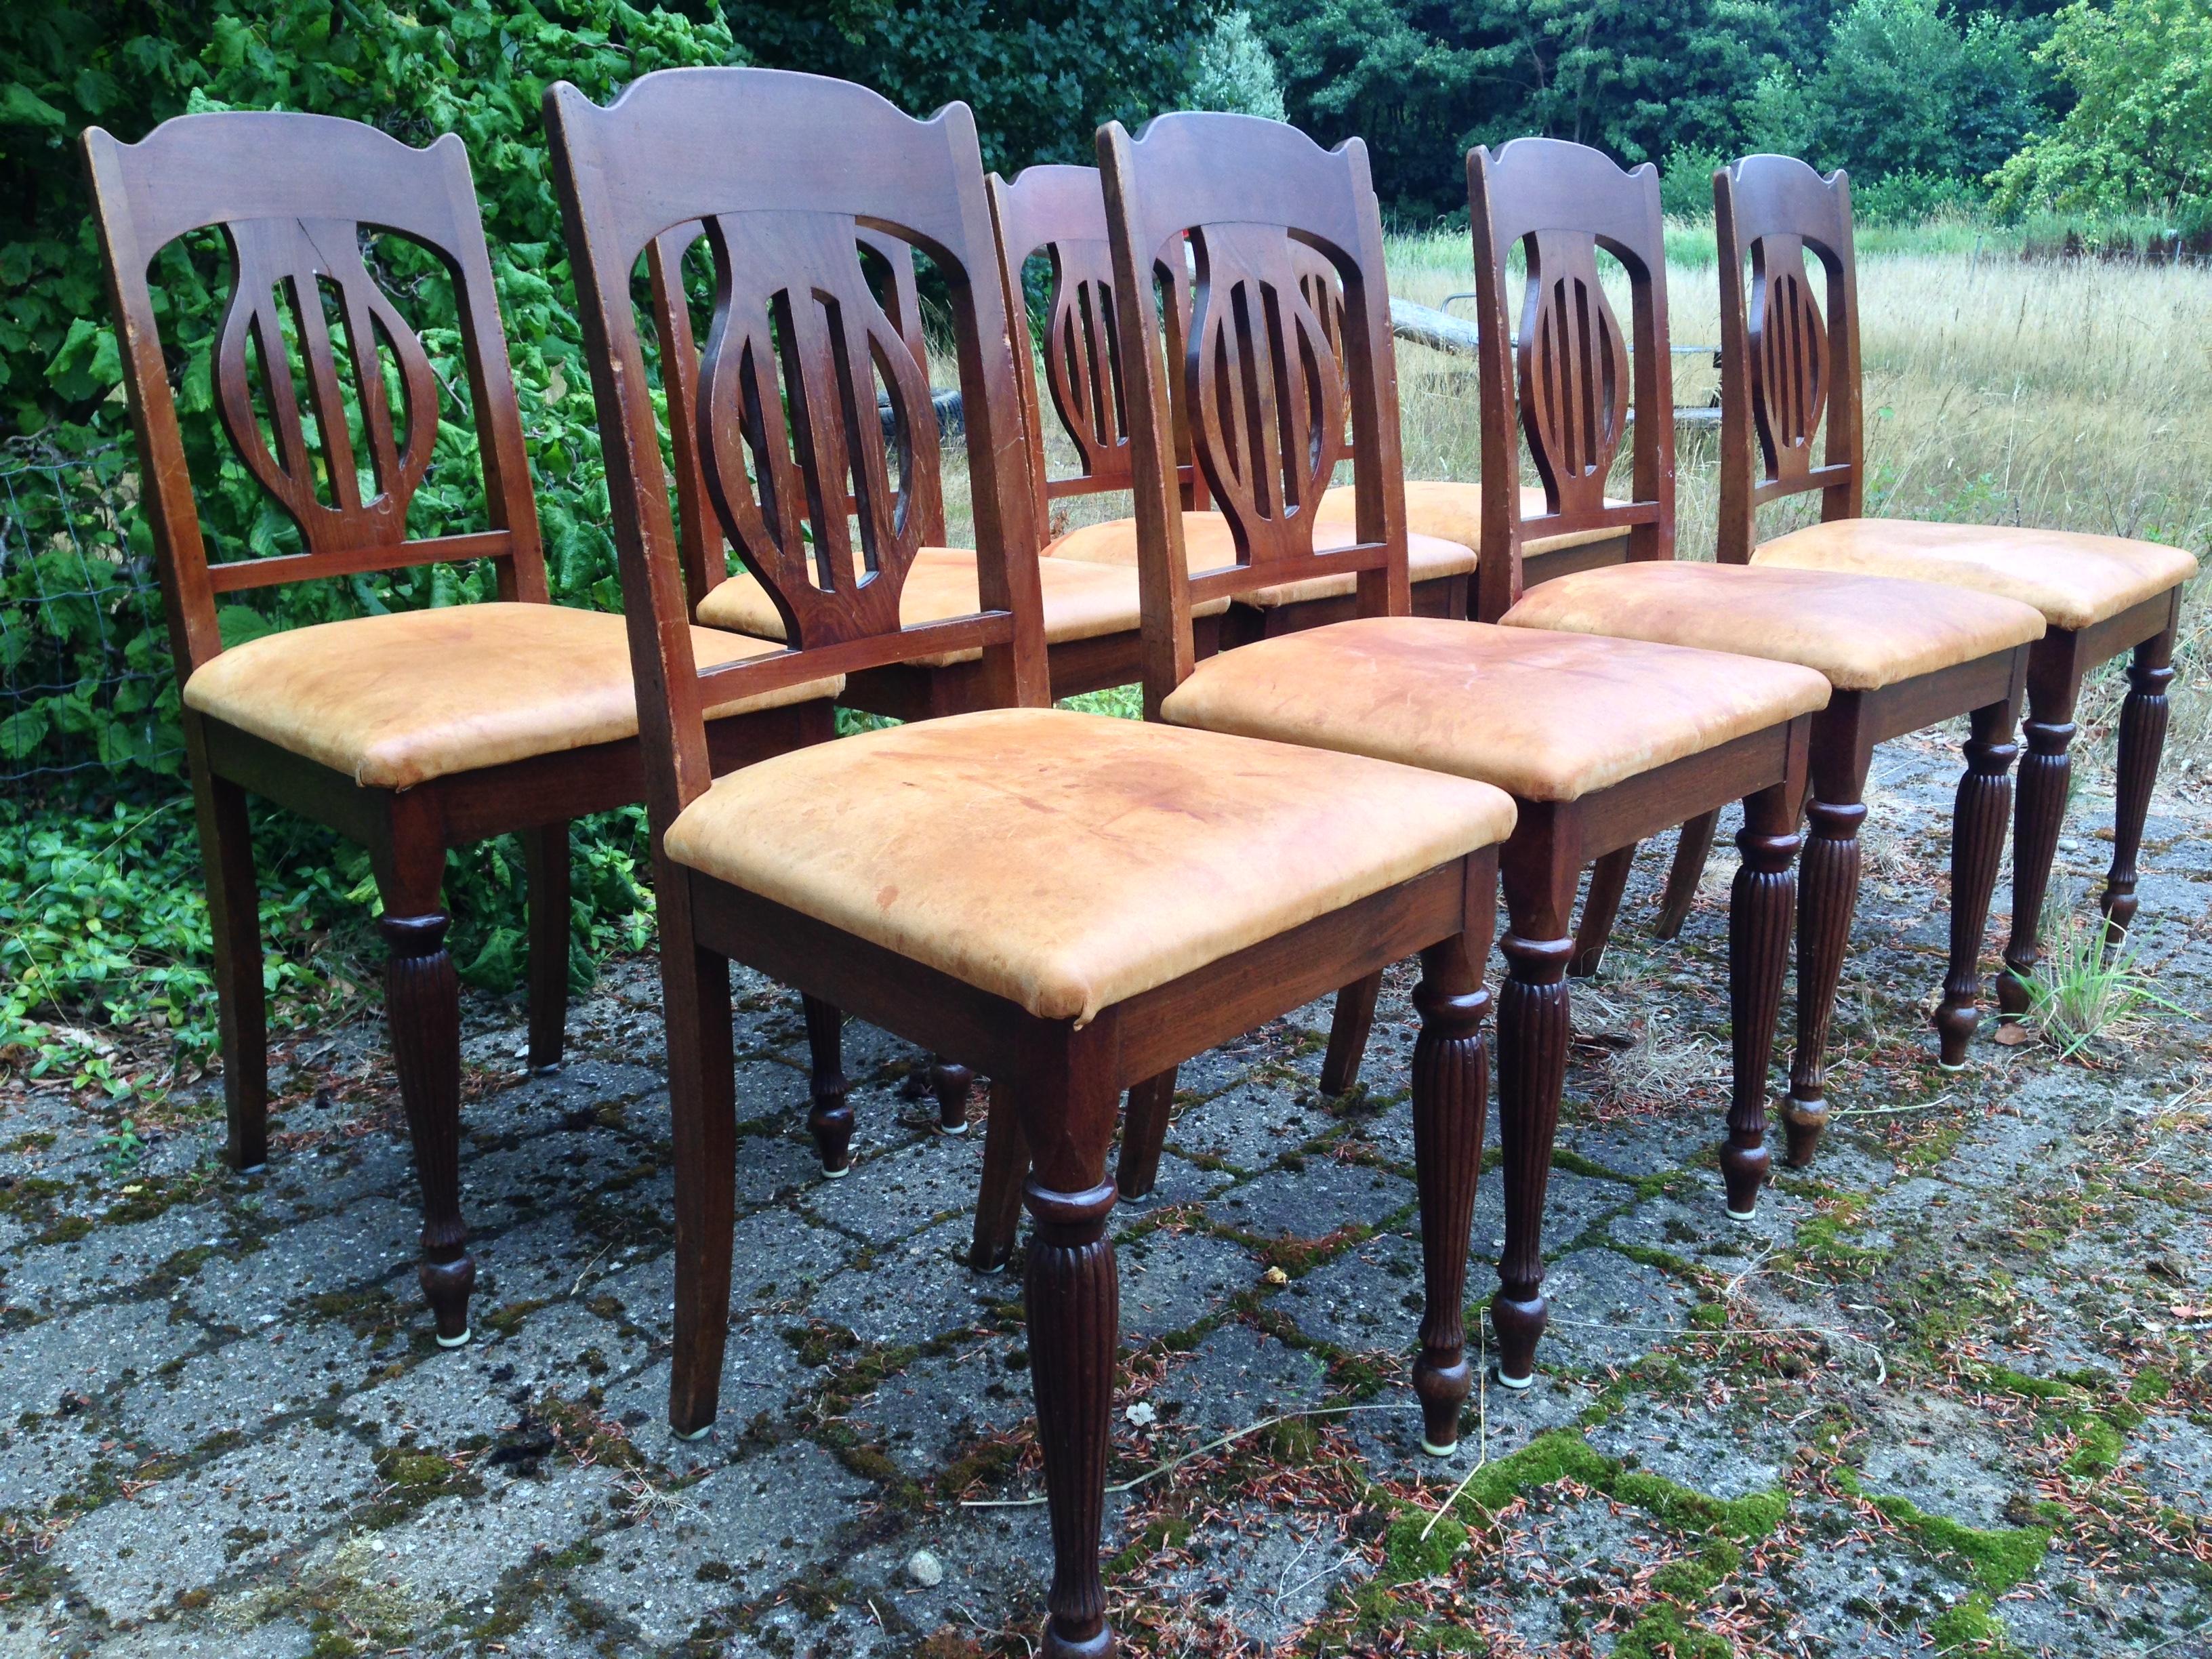 Set of 8 Art Nouveau Chairs in Mahogany and Light Oxhide Seats, 1910s-1920s In Fair Condition For Sale In Vejle, DK